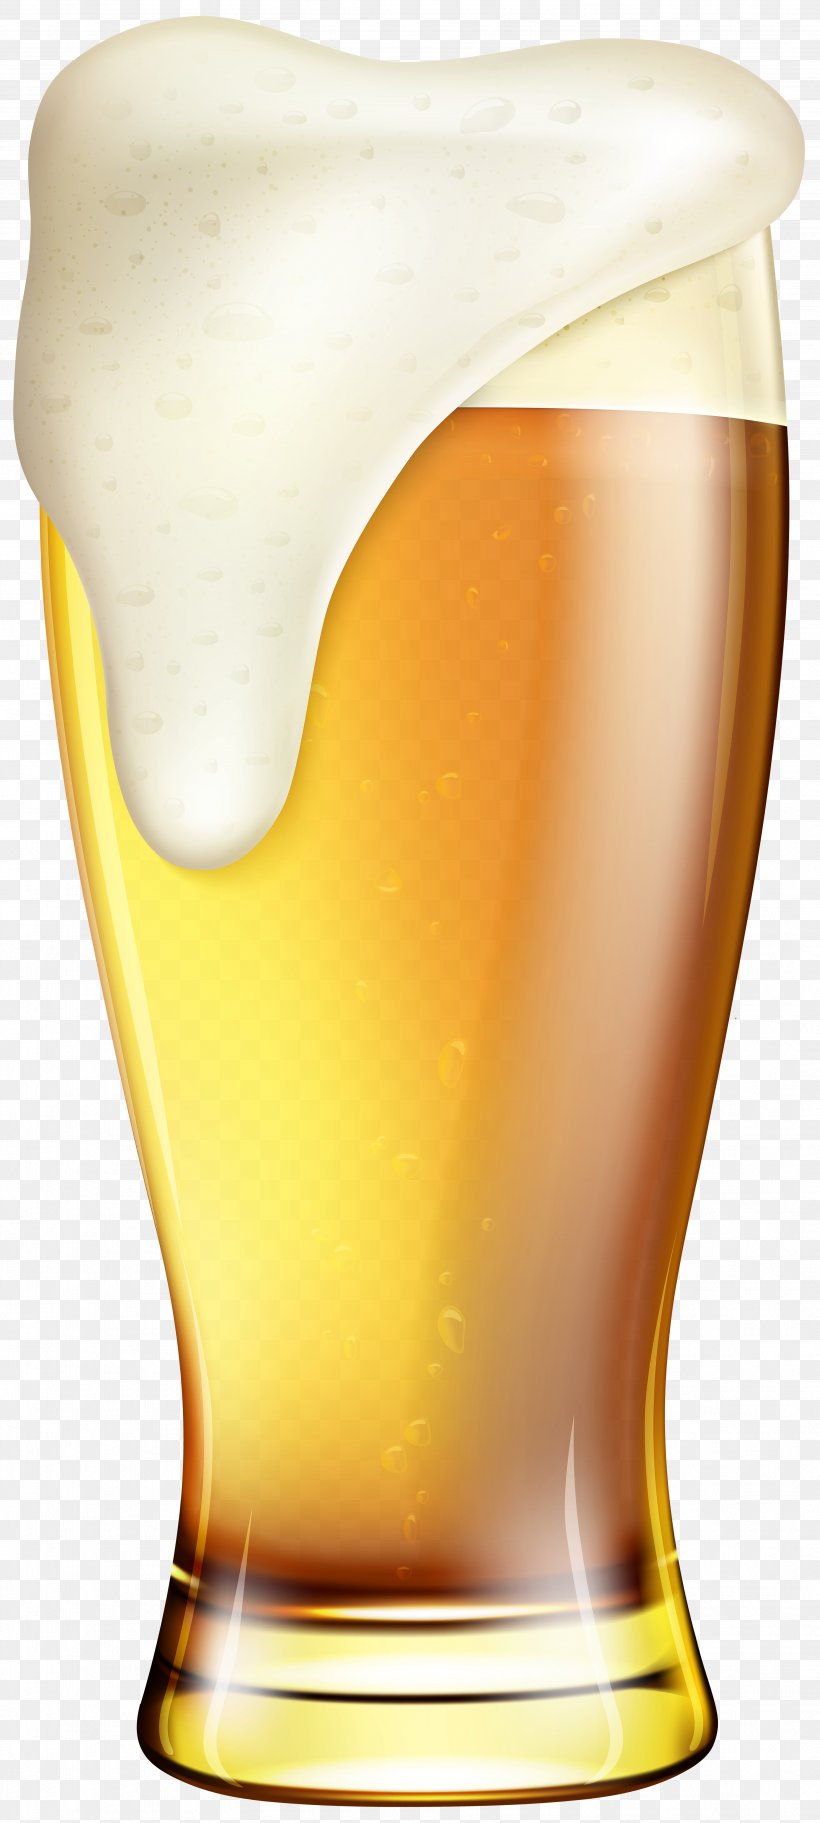 Beer Glass Joint Leg Knee Drinkware, PNG, 3598x8000px, Beer Glass, Drinkware, Joint, Knee, Leg Download Free